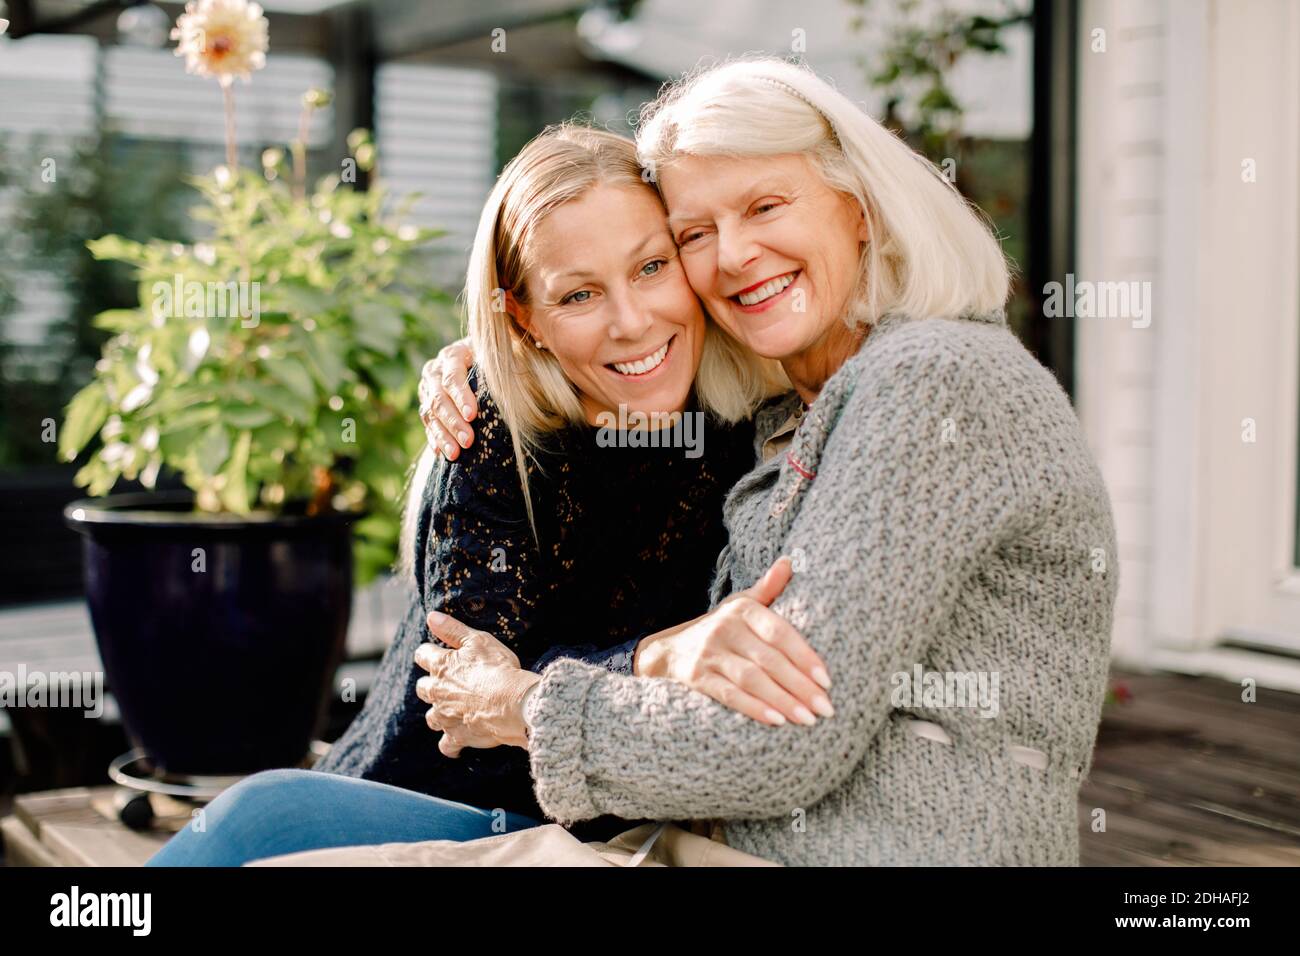 Smiling mother and daughter with arm around sitting in backyard Stock Photo